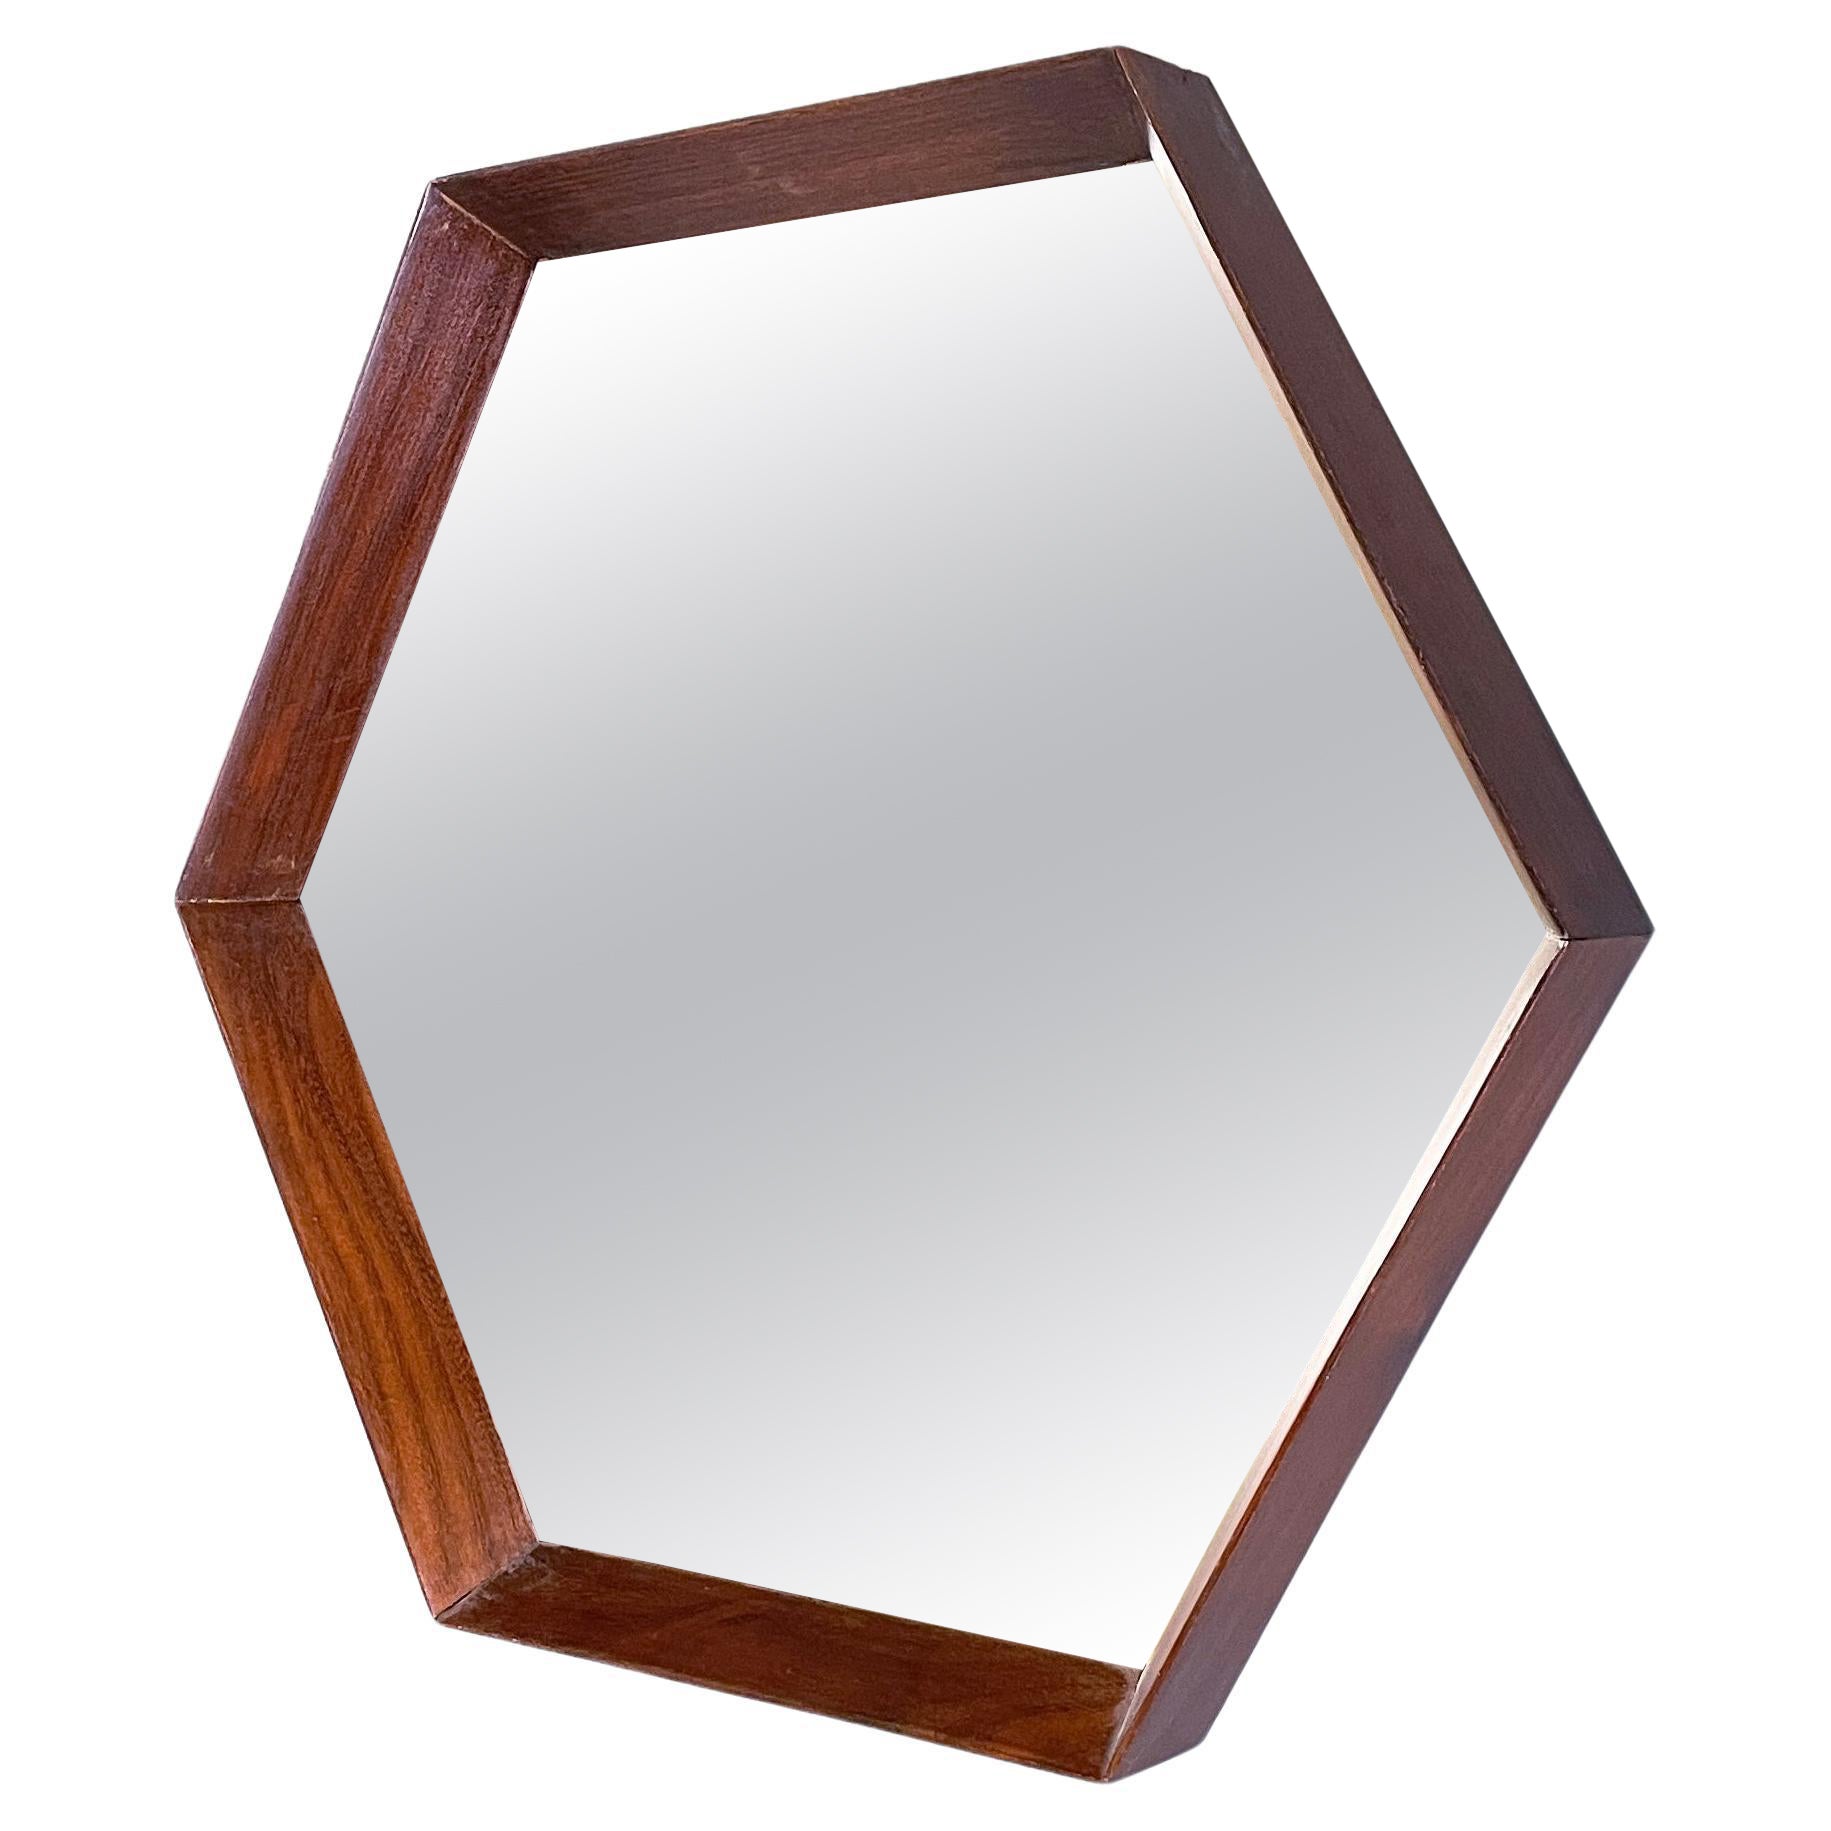 Italian mid-century Hexagonal wall mirror with wooden frame, 1960s For Sale